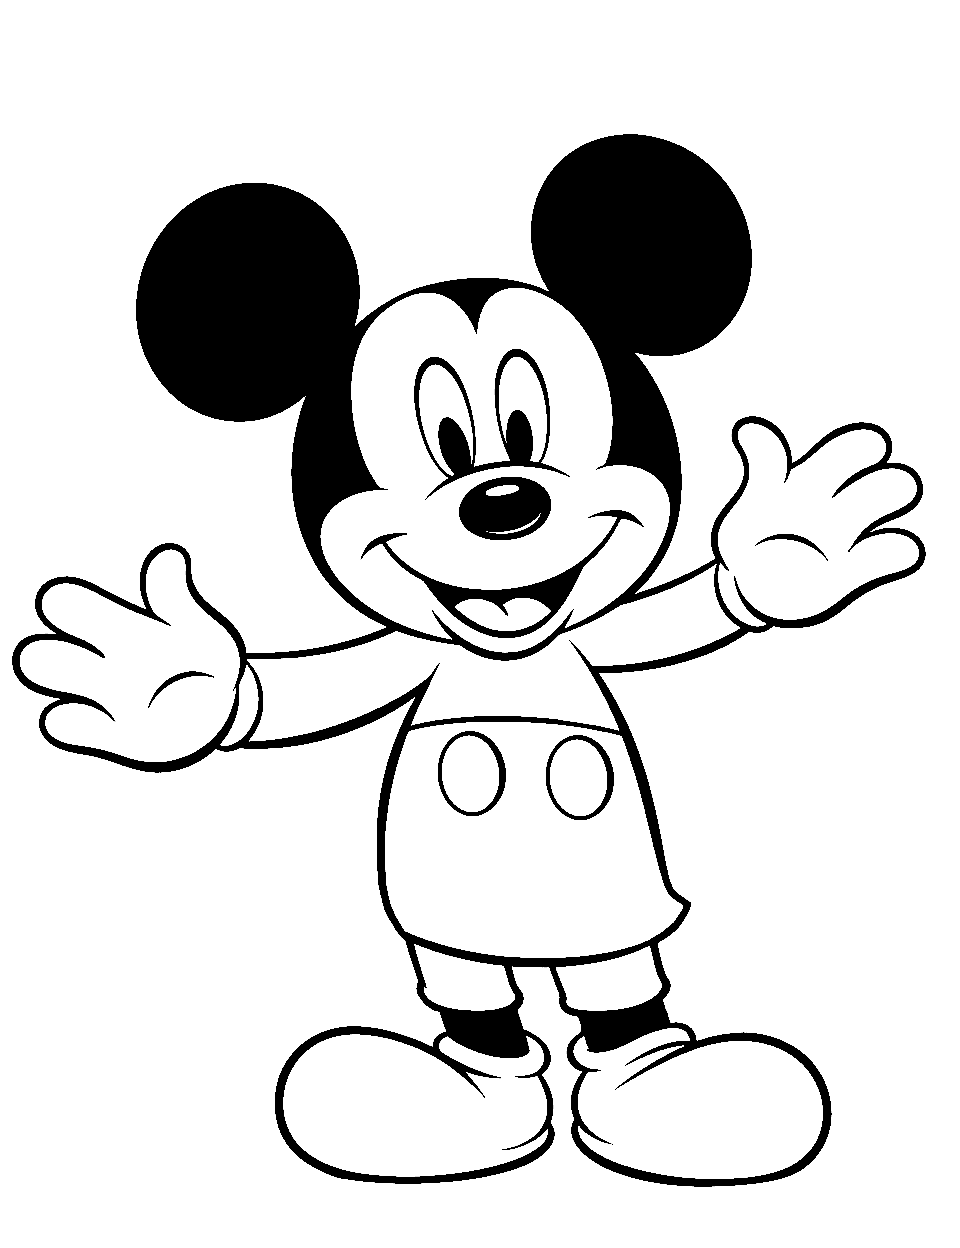 Disney Delight Coloring Page - Mickey Mouse waving hello.